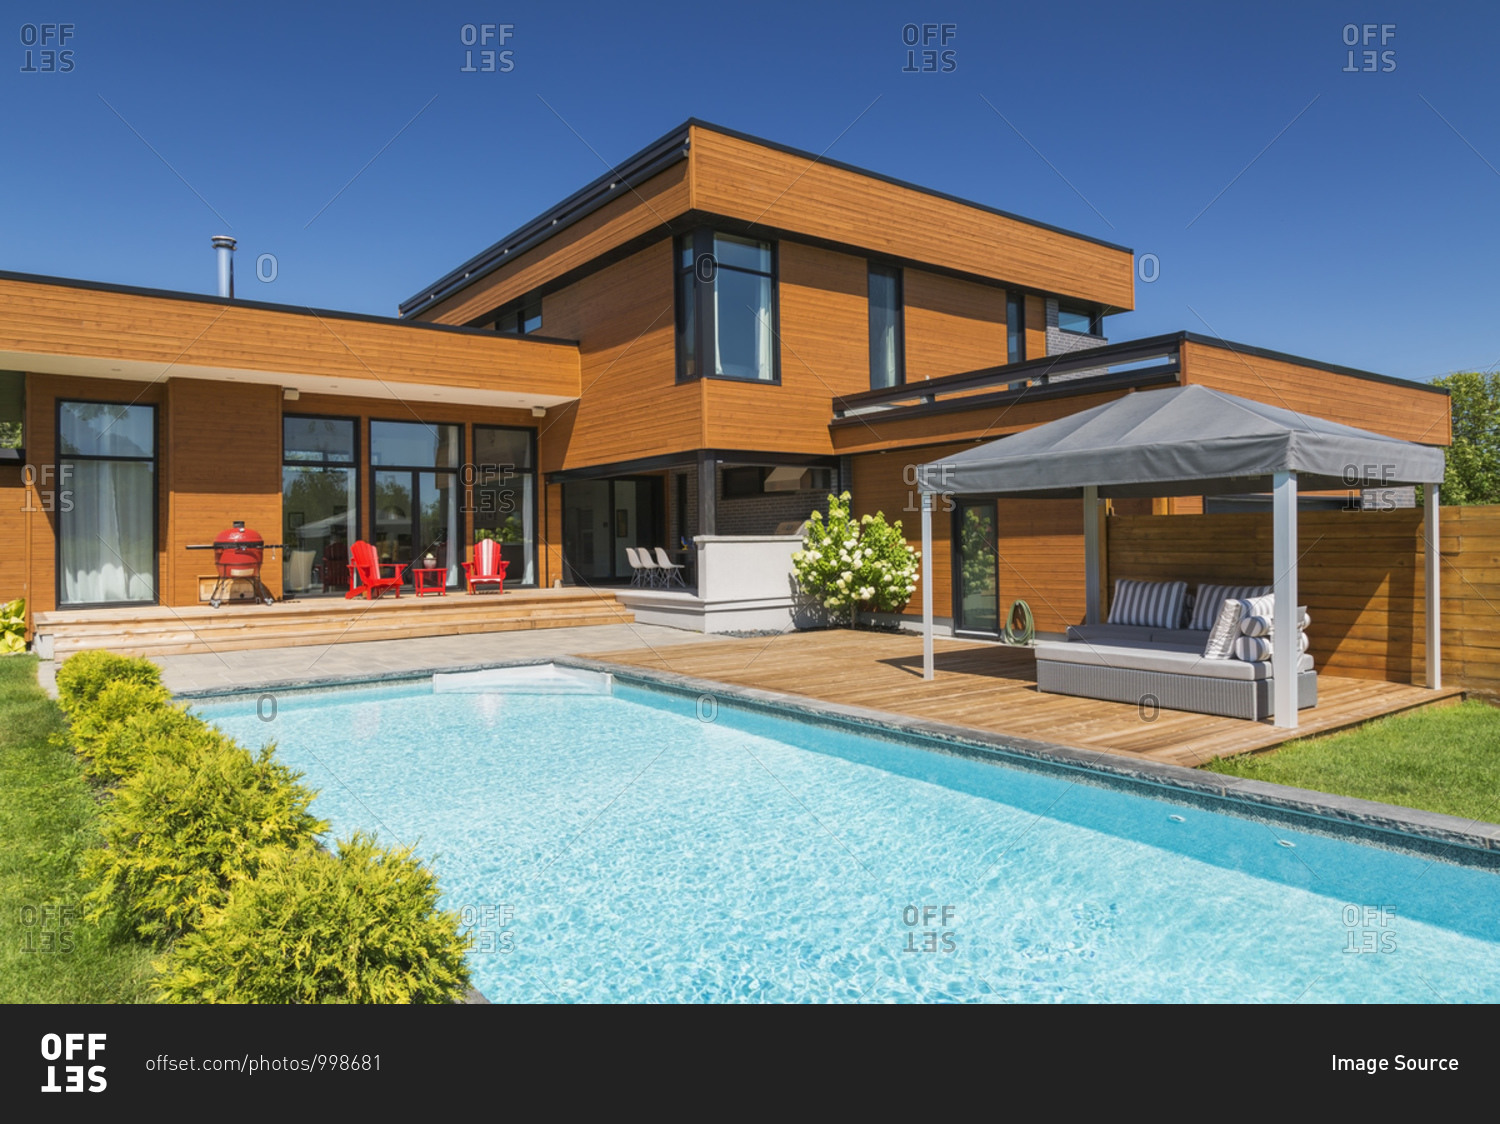 Exterior view of modern cube style home with stained horizontal wood cladding, swimming pool and wooden deck with gazebo canopy, Quebec, Canada.